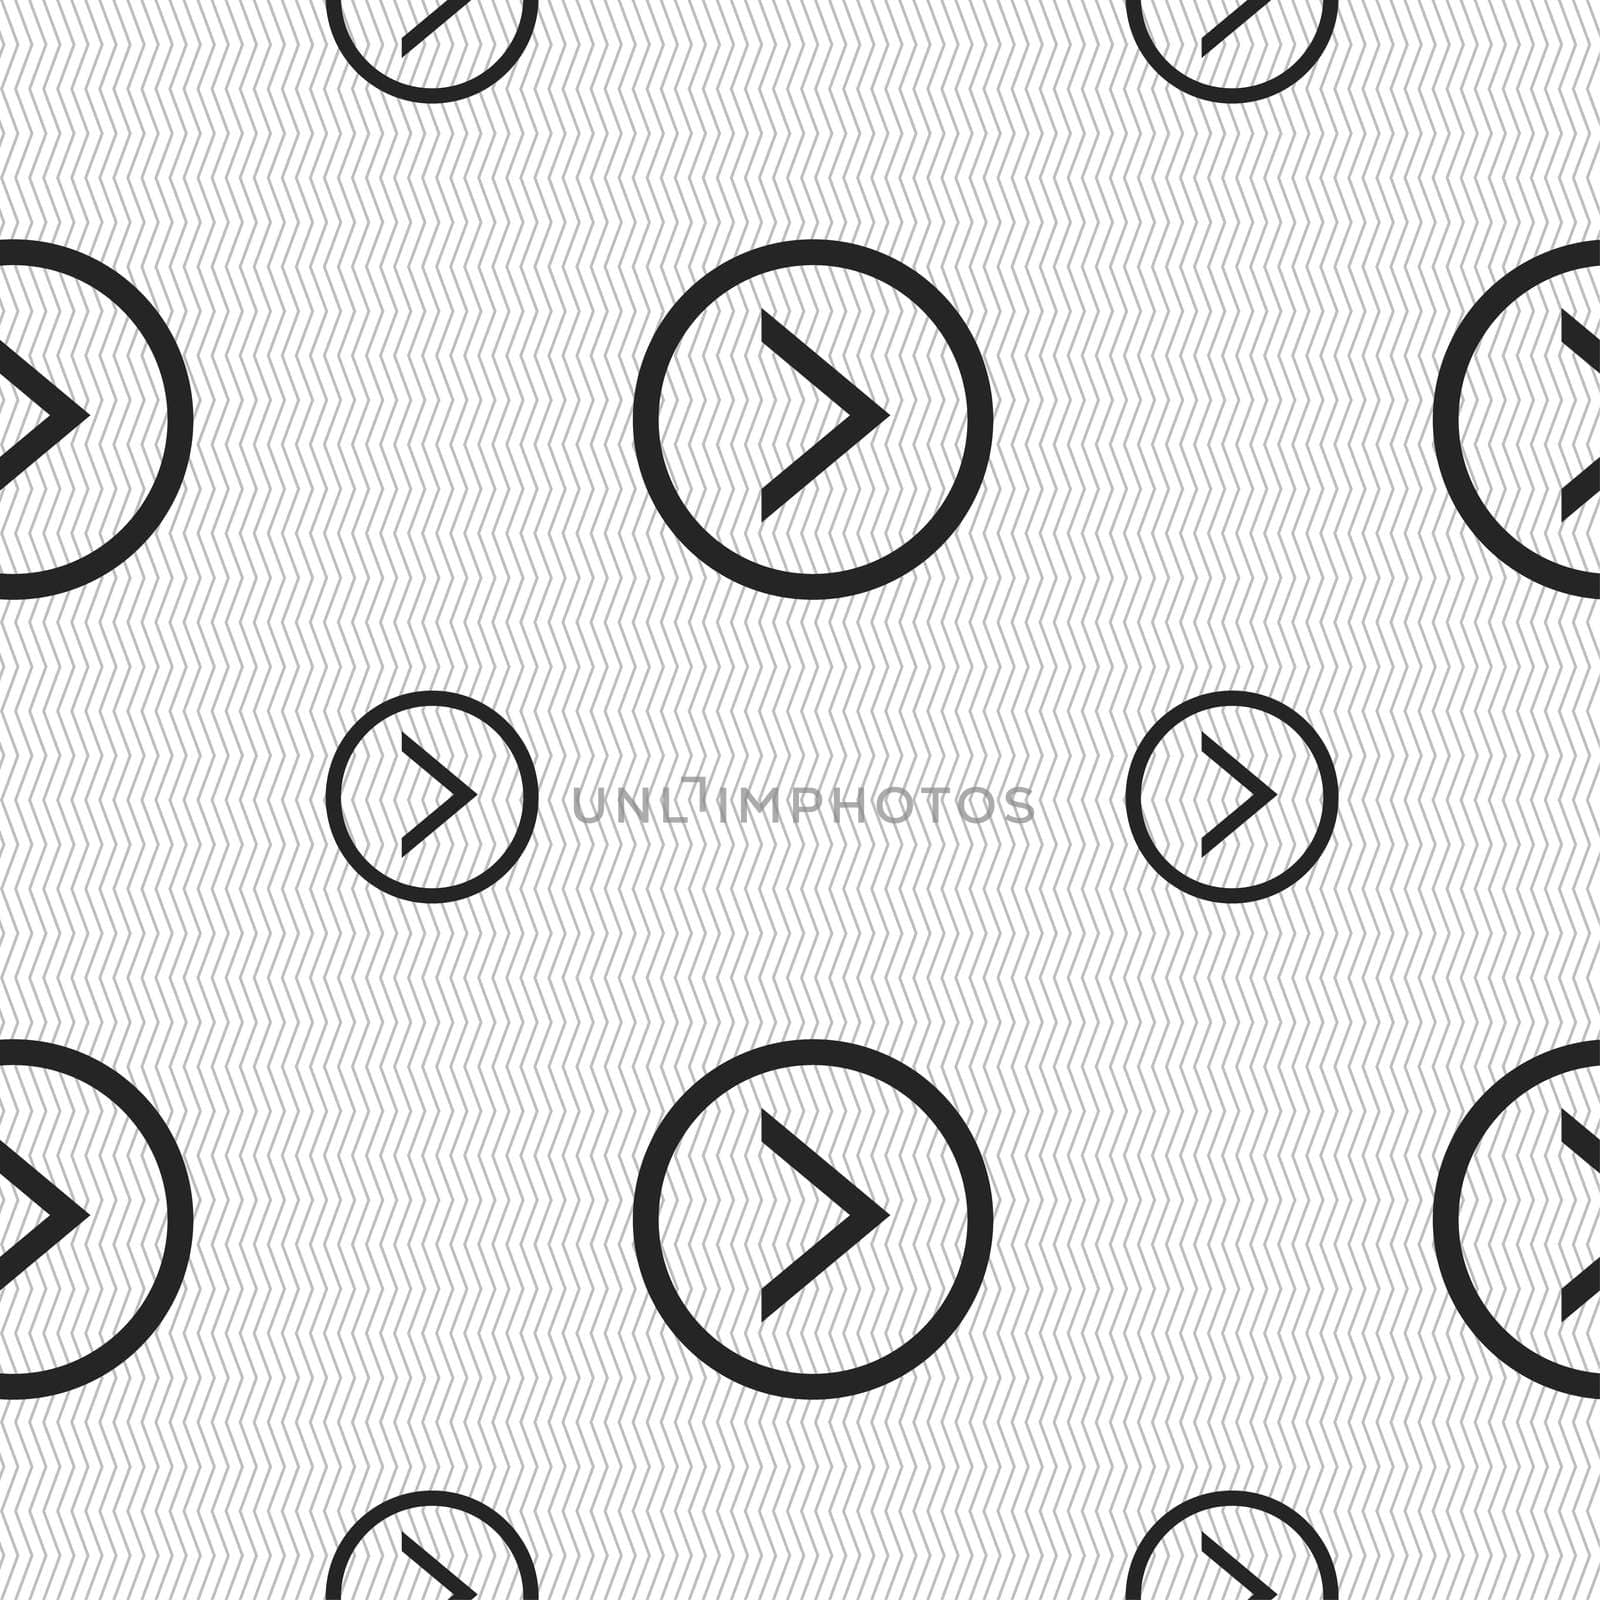 Arrow right, Next icon sign. Seamless pattern with geometric texture. illustration